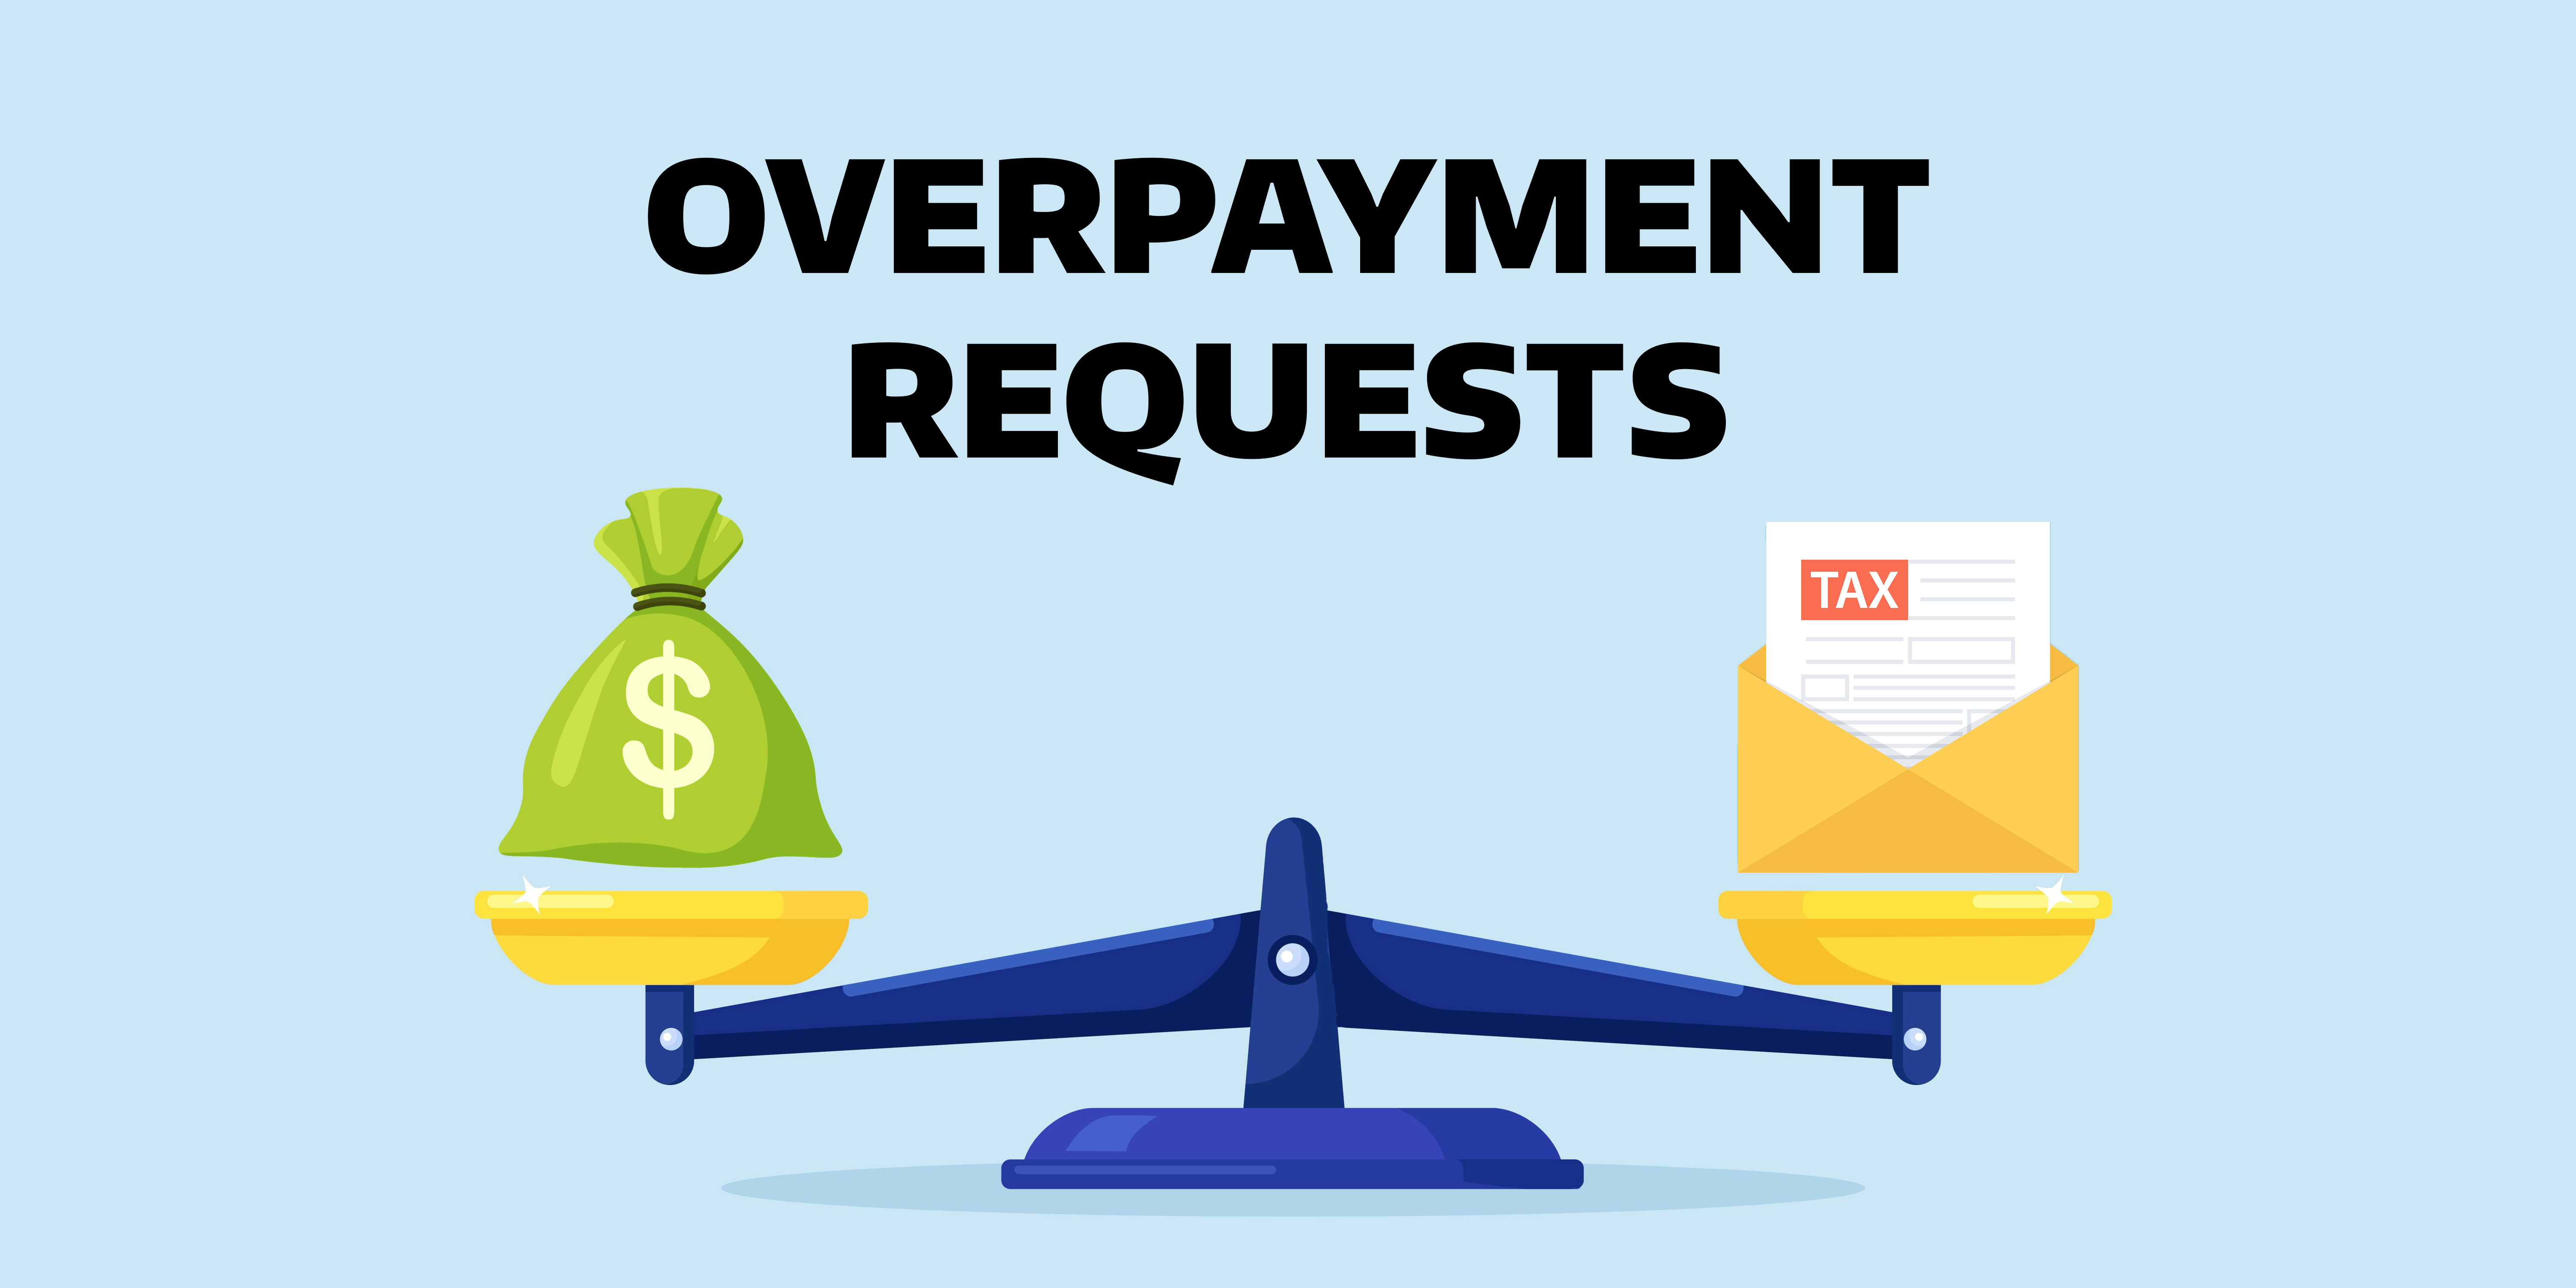 Overpayment Requests banner